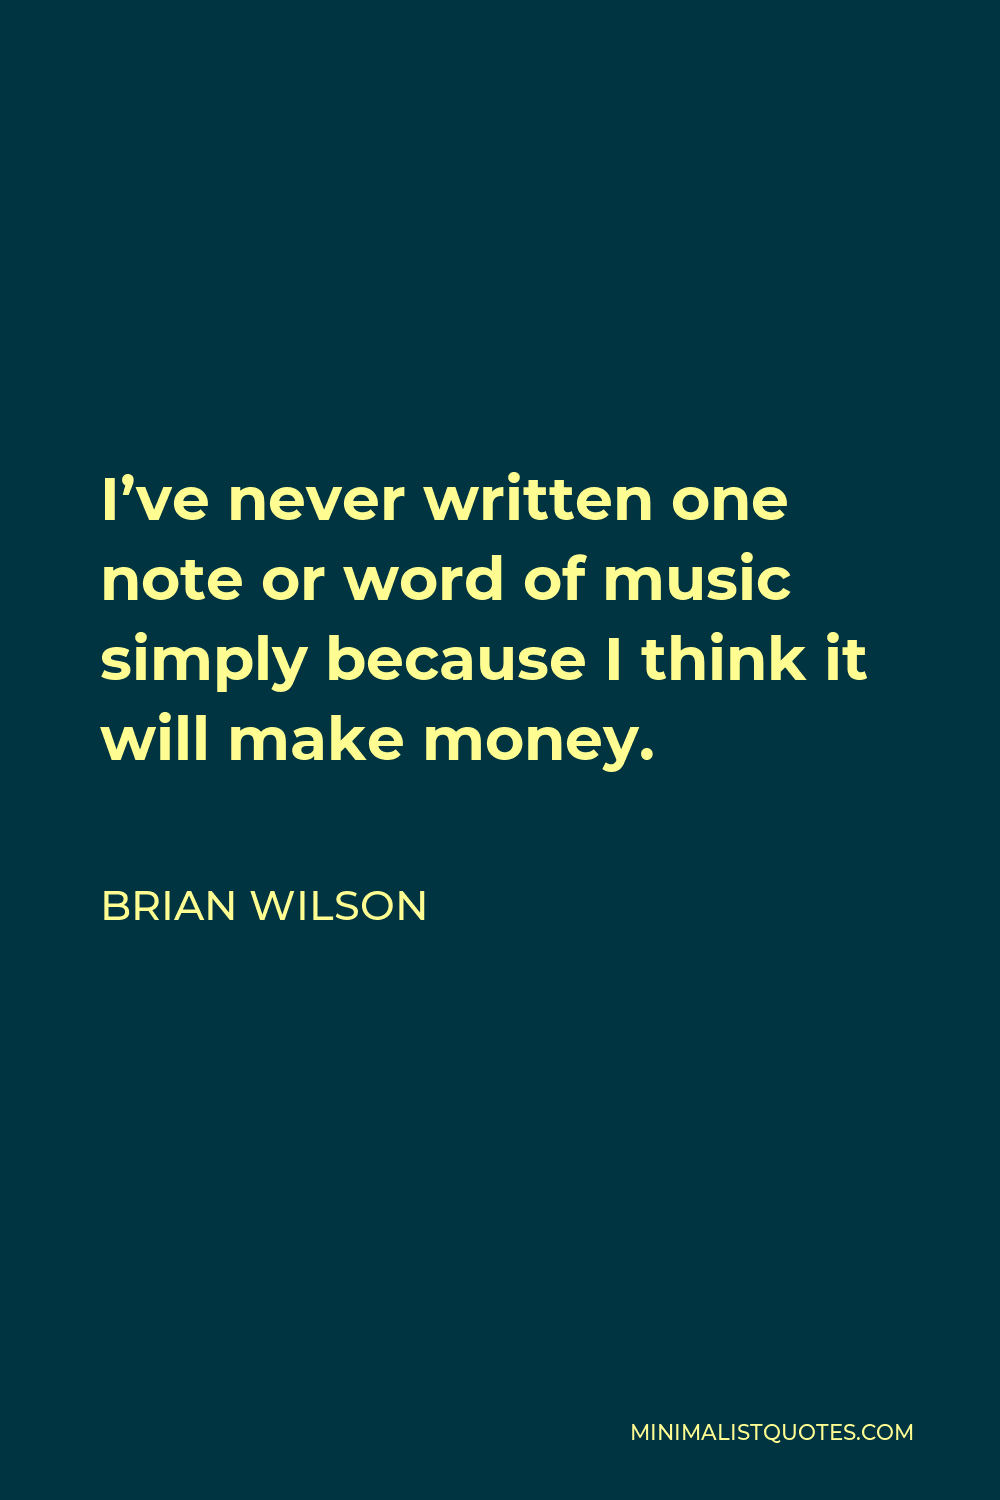 Brian Wilson Quote - I’ve never written one note or word of music simply because I think it will make money.